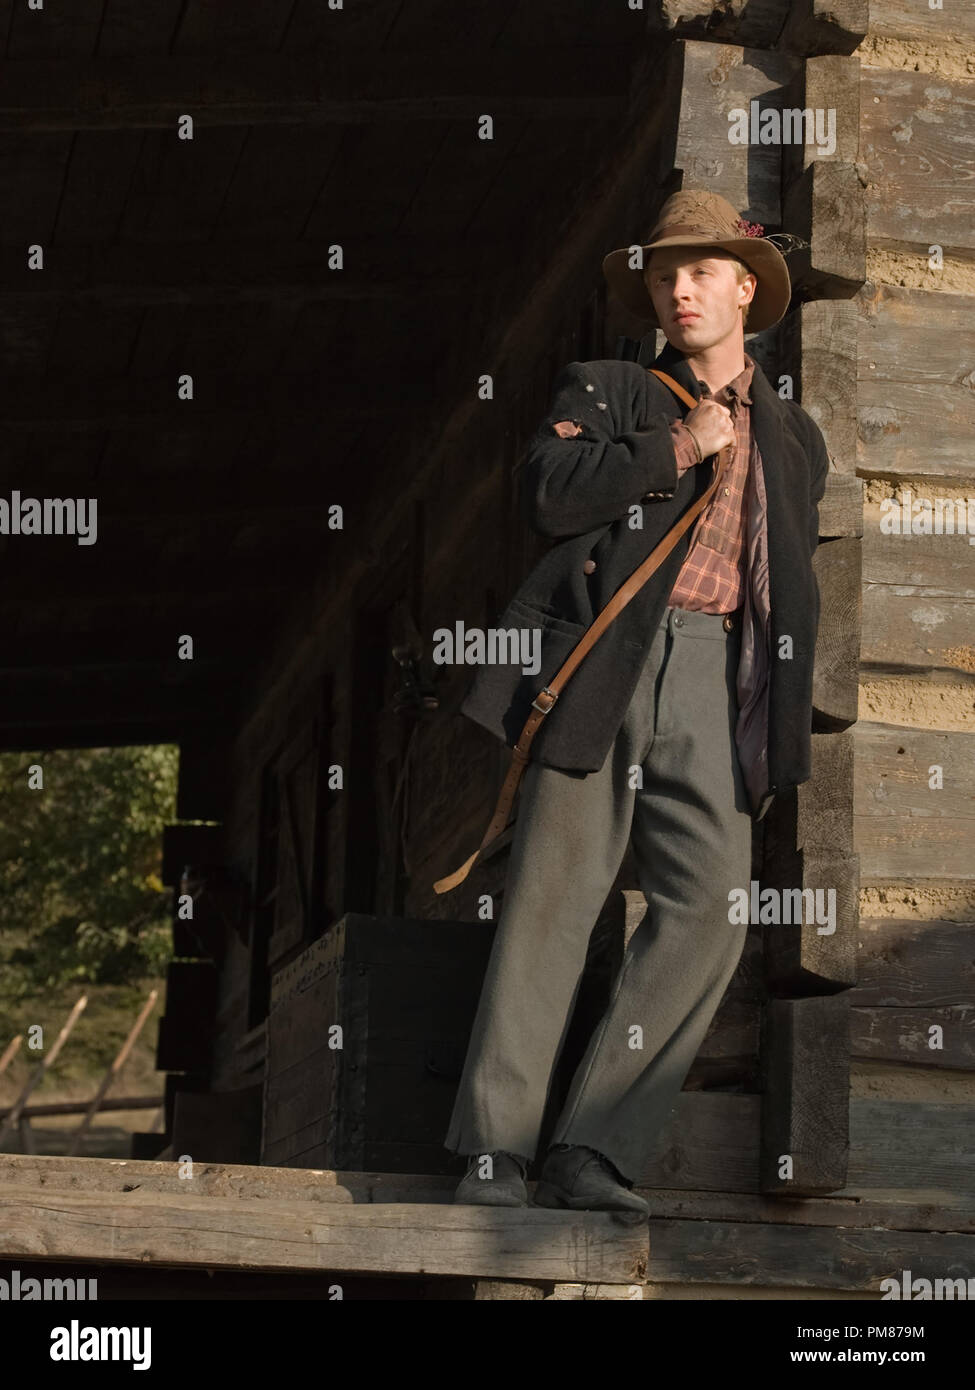 'Hatfields & McCoys' 2012 Cotton Top Mounts, played by Noel Fisher. Stock Photo